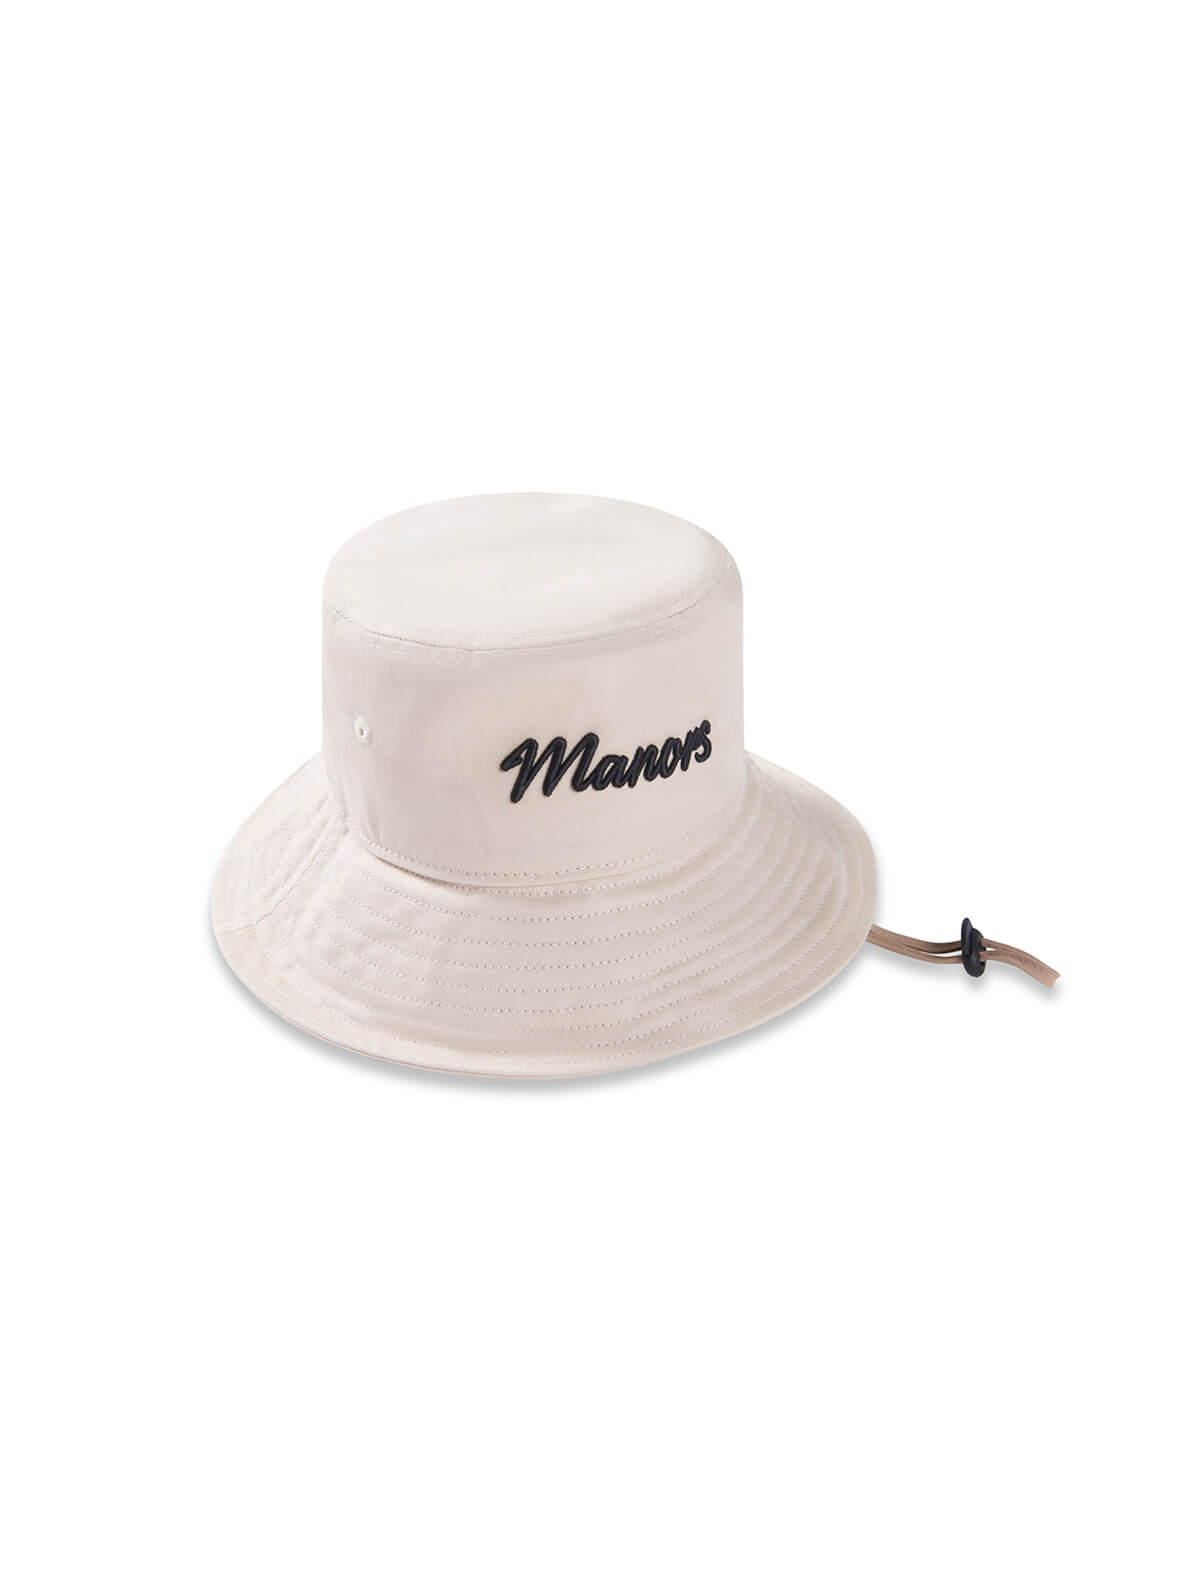 MANORS GOLF Classic Bucket Hat in Natural